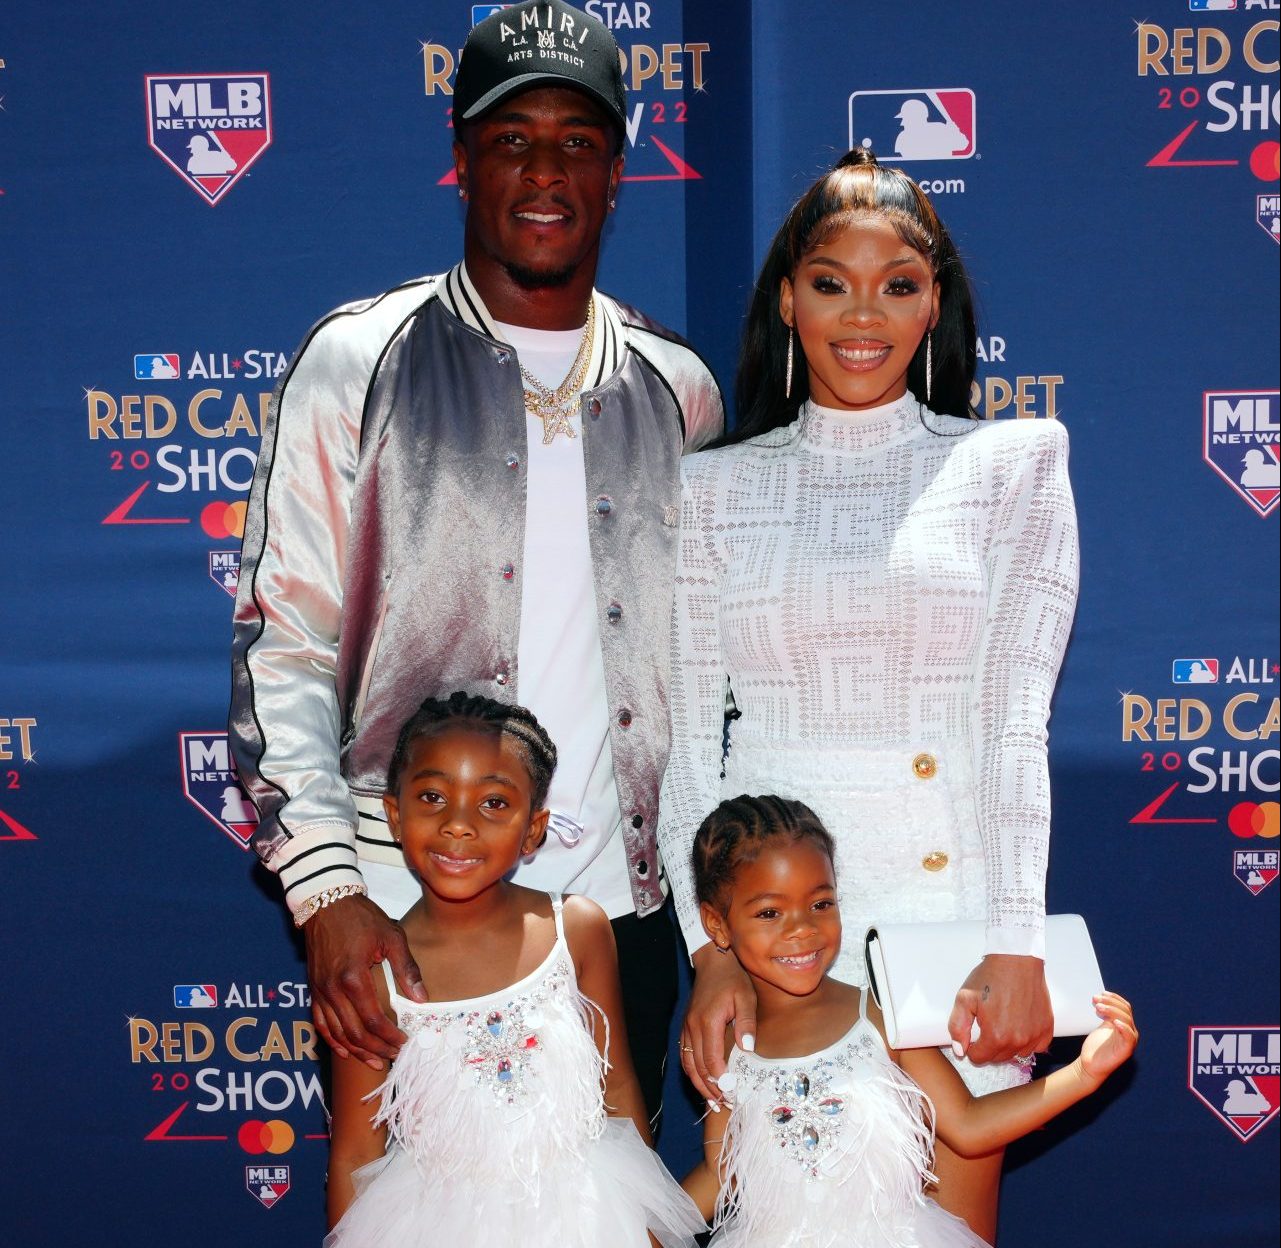 MLB Star Tim Anderson Walks The Red Carpet With His Wife &amp; Children After Another Woman Alleges He Is The Father Of Her Child